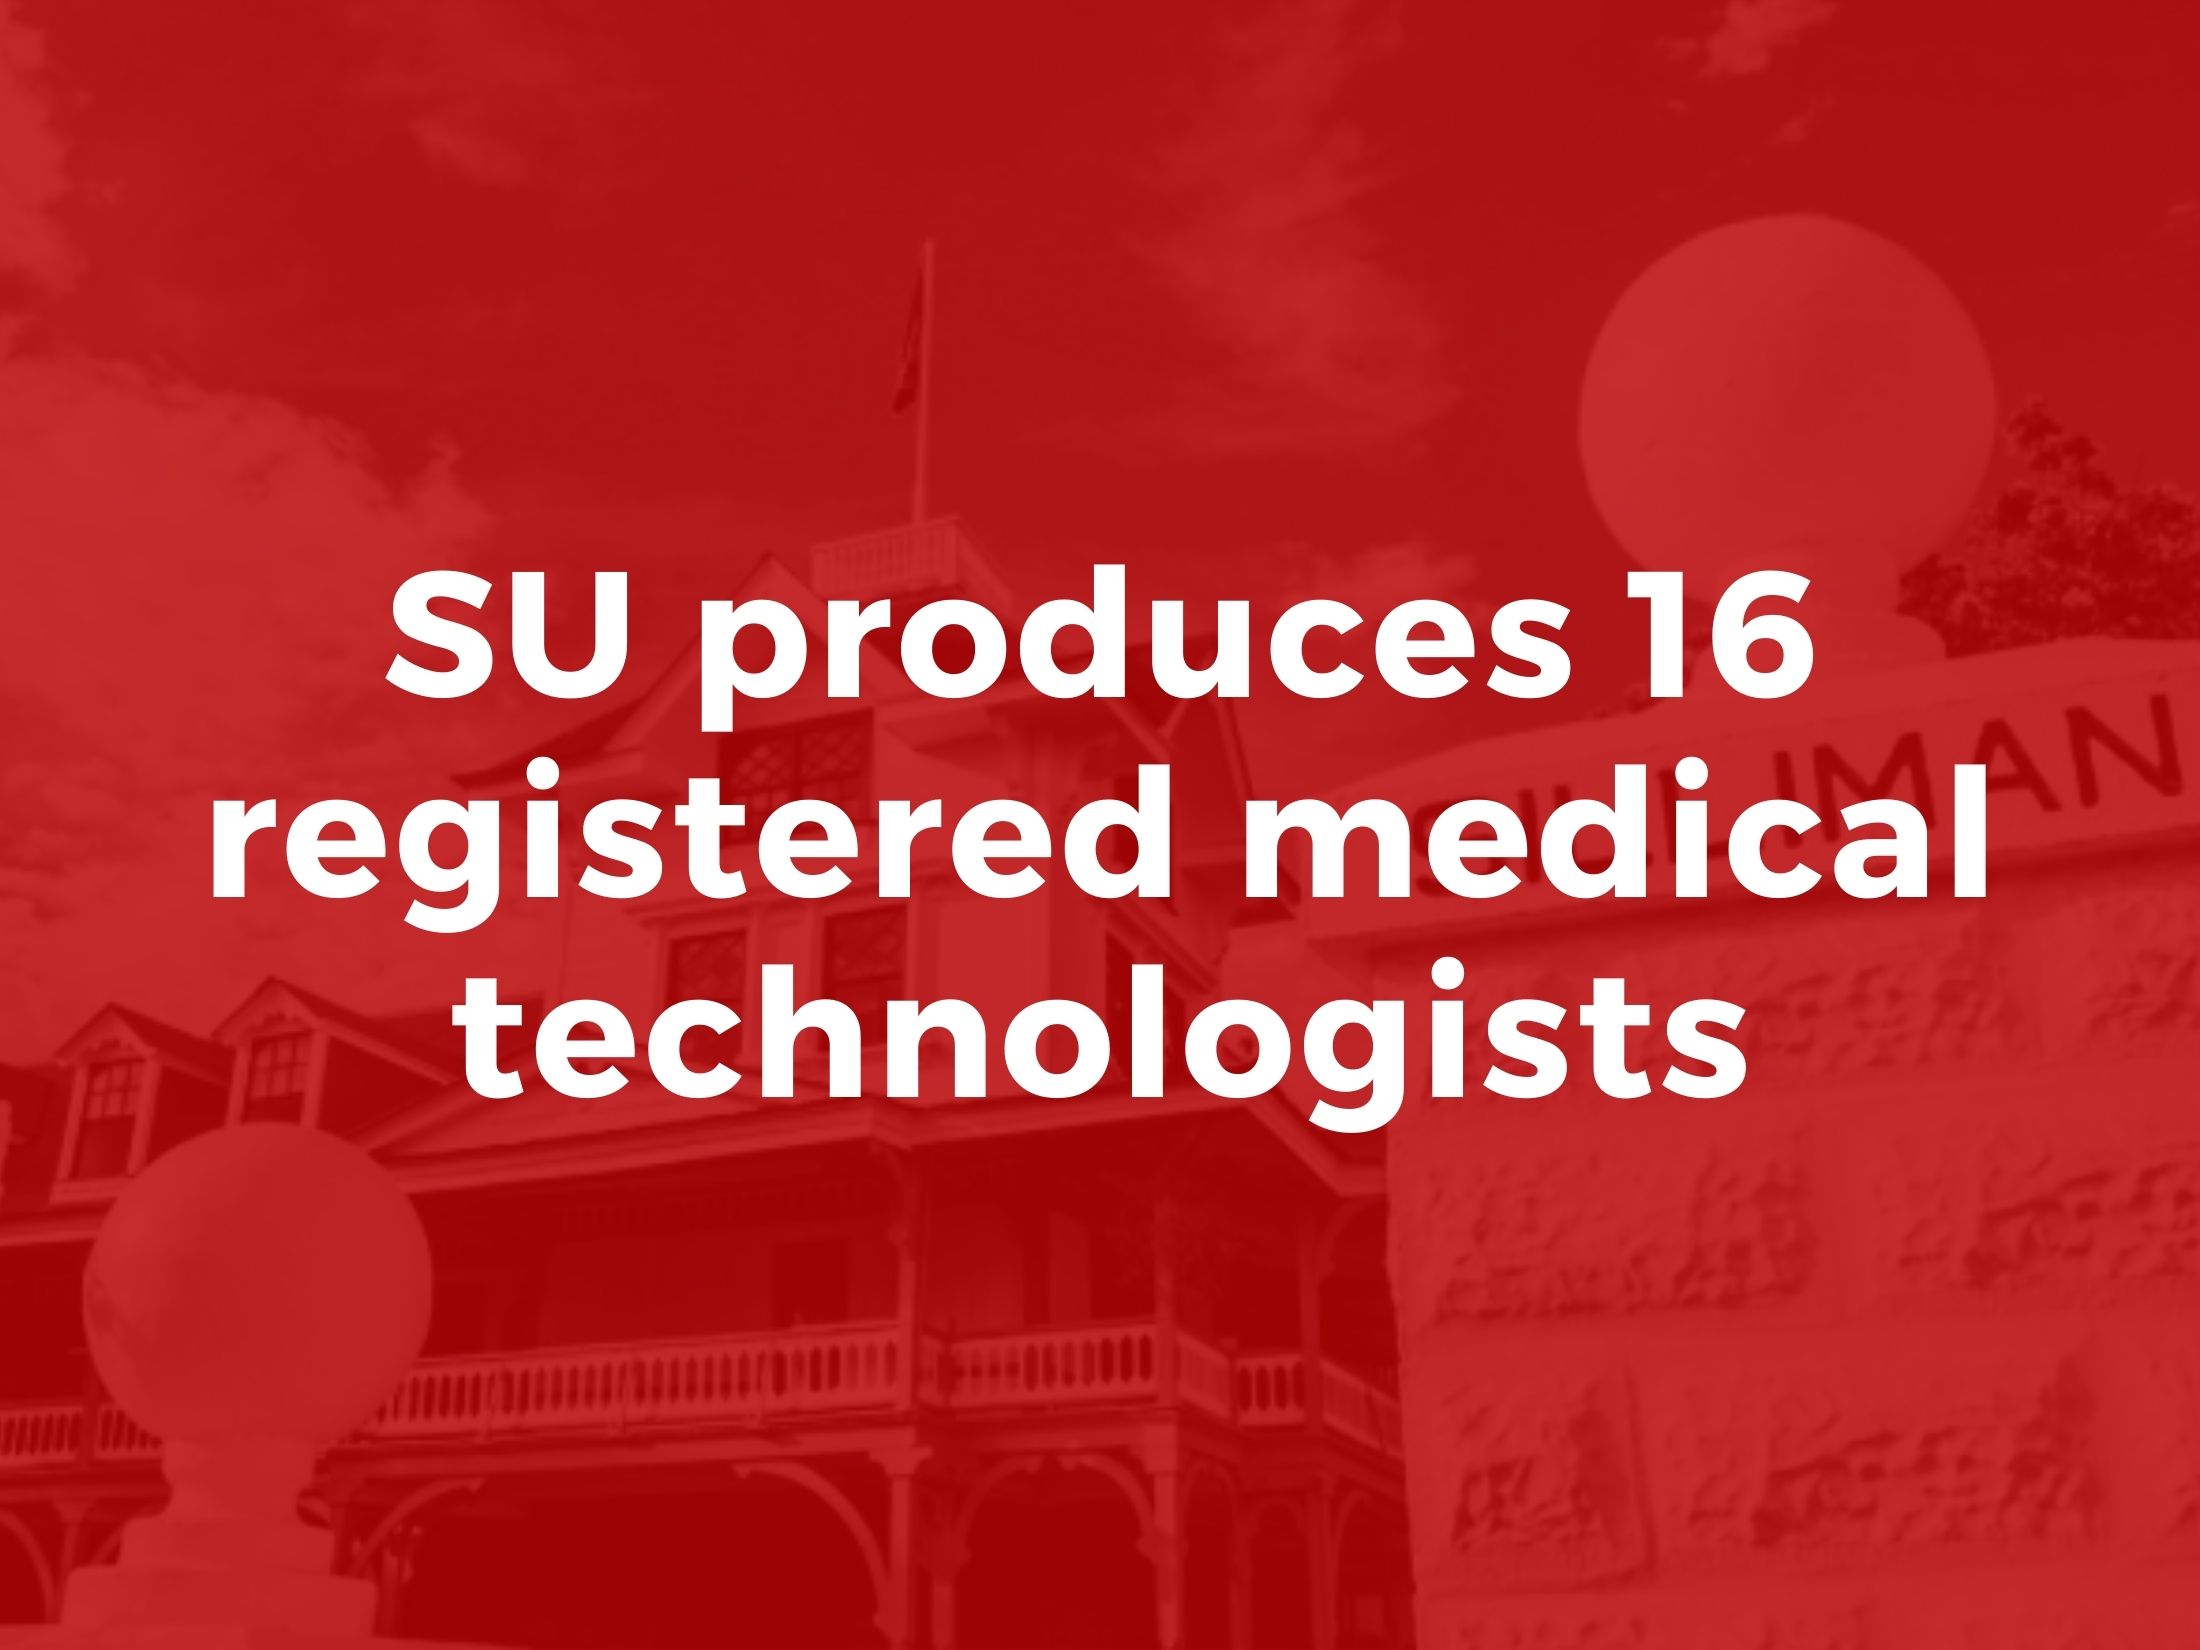 SU produces 16 registered medical technologists